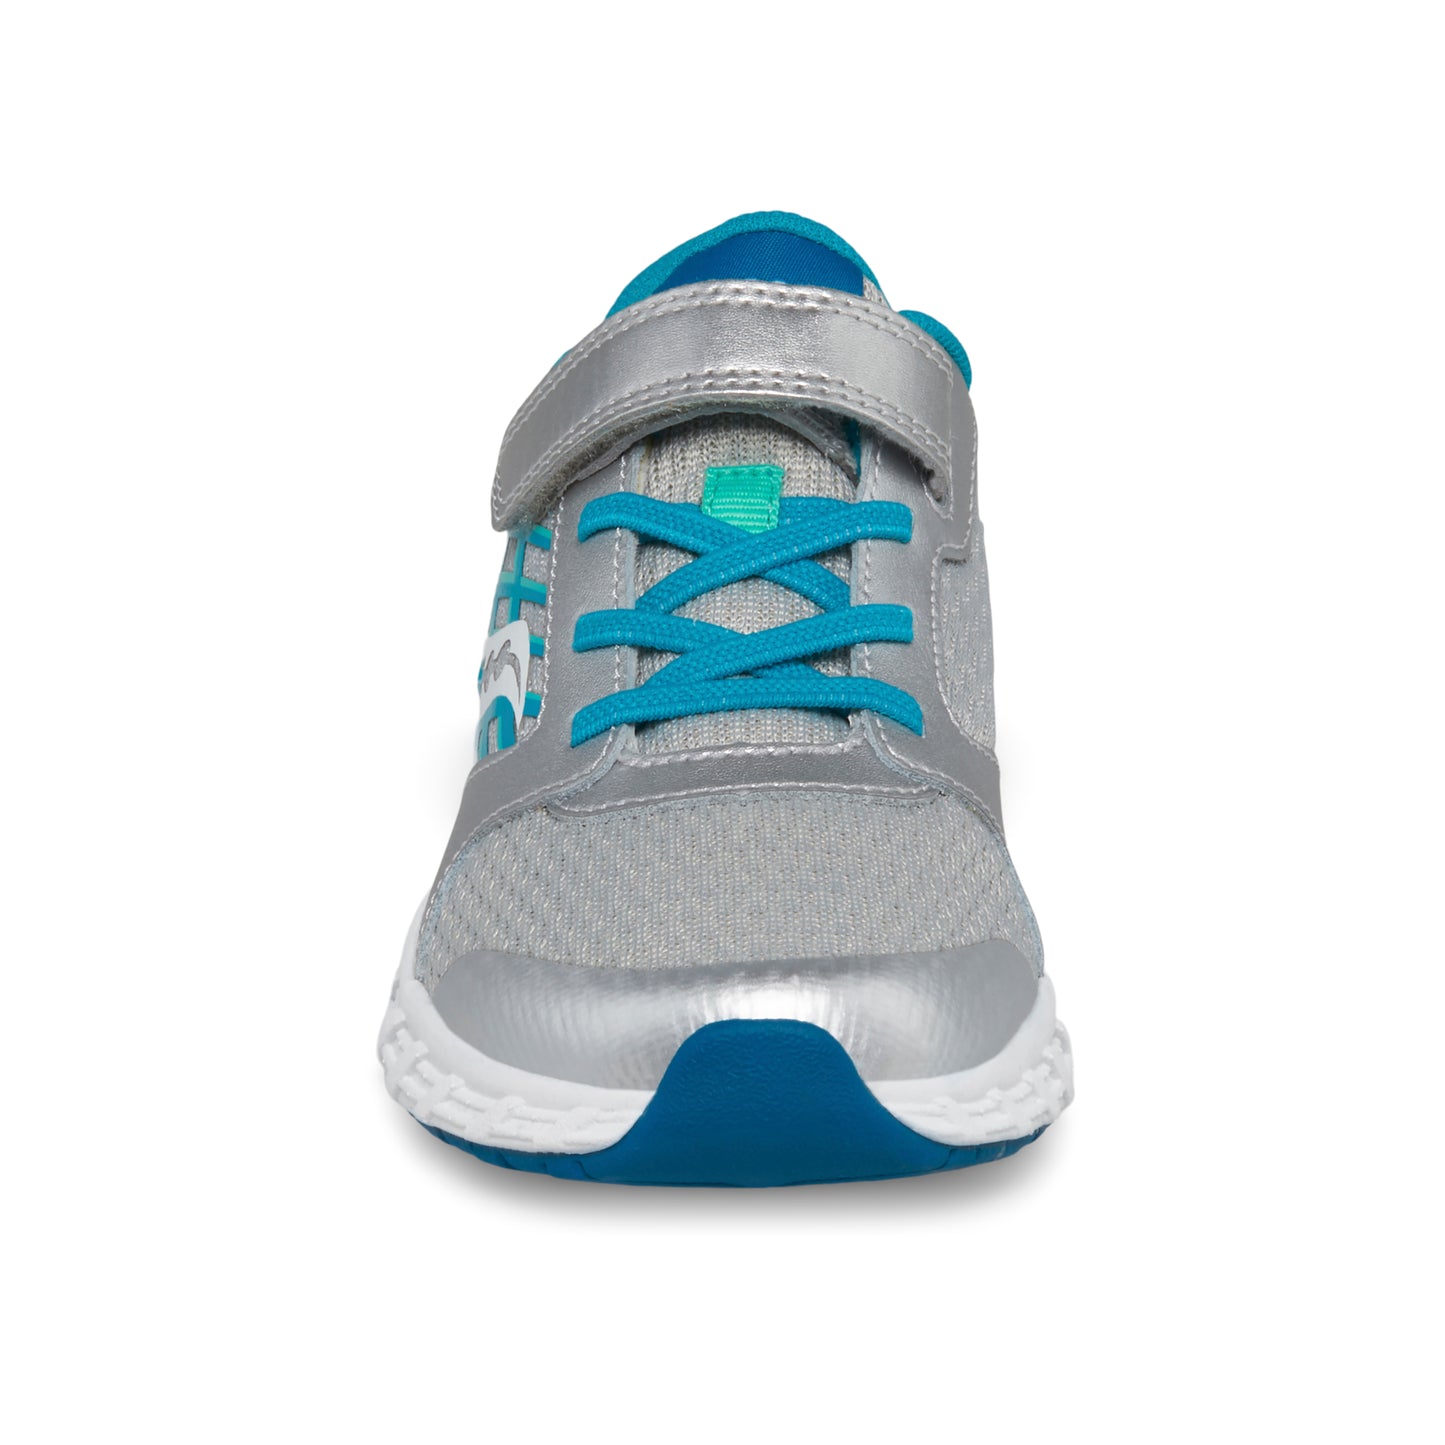 wind-ac-20-sneaker-bigkid-turquoise-silver__Turquoise/Silver_5